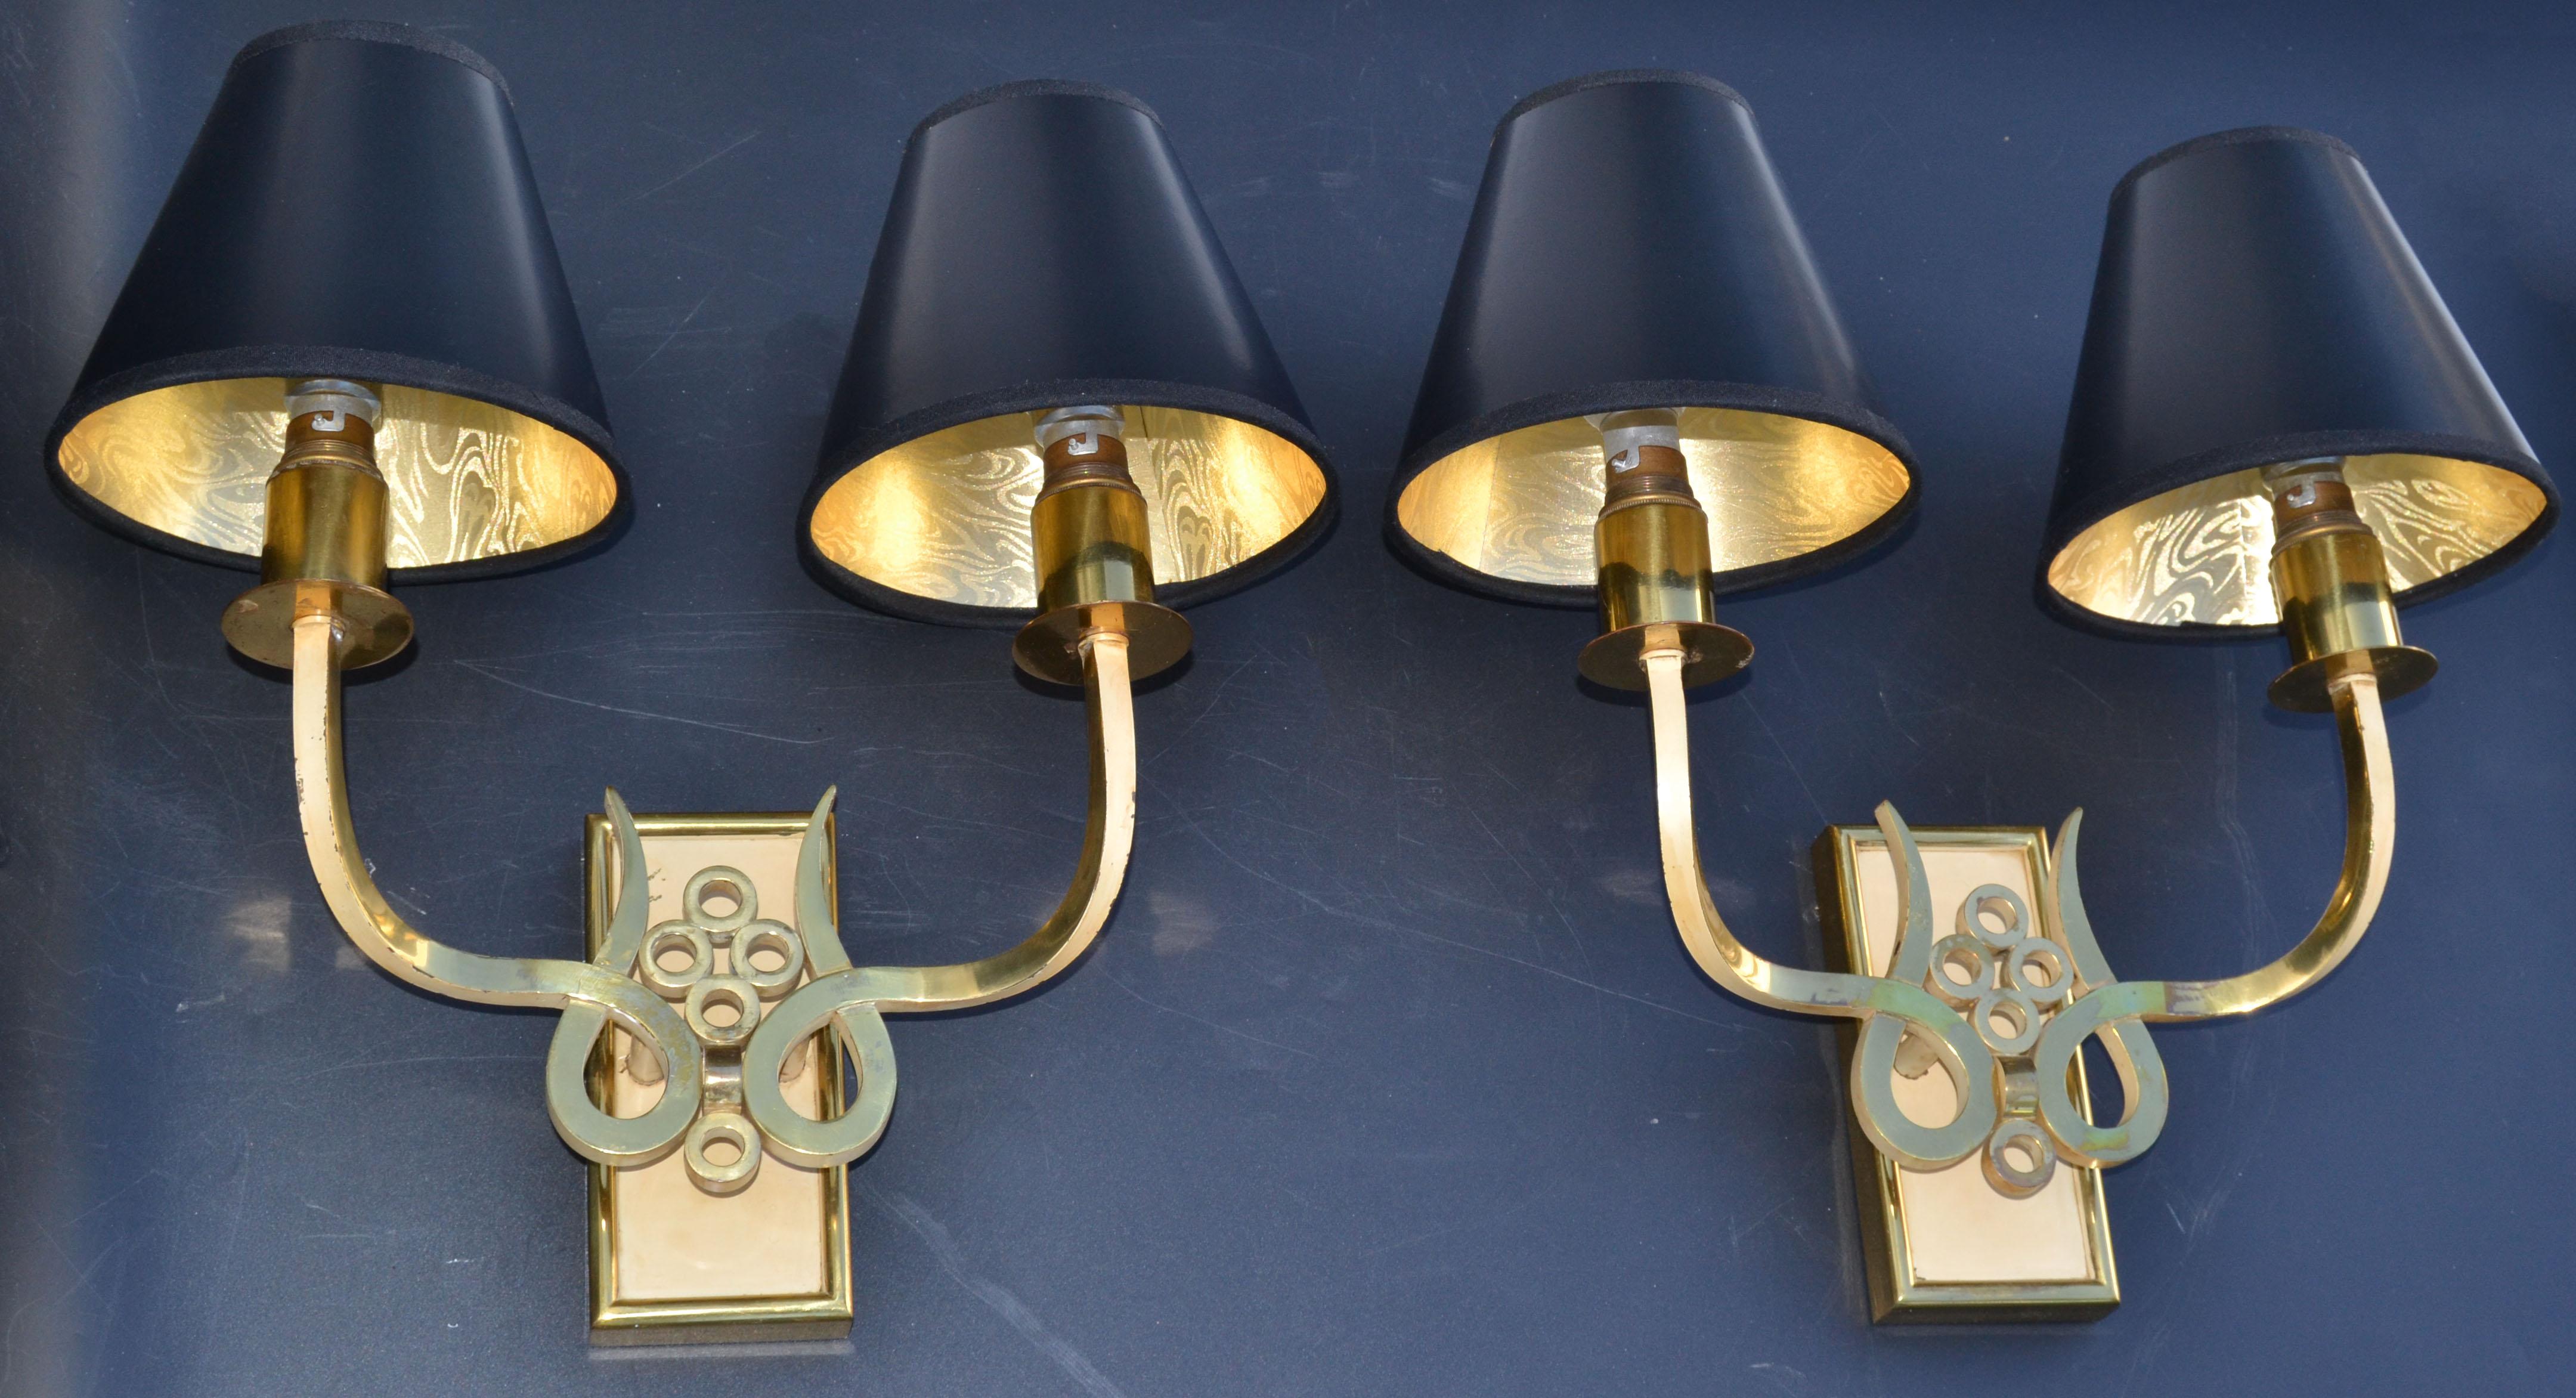 Pair of circa 1955 French Mid-Century Modern bronze & brass sconces, wall lights with shades in black & each sconce takes 2 light bulbs max. 60 watts.
Measurements with the shades: 13.75 inches width, projection to the wall: 7 inches.
Back plate: